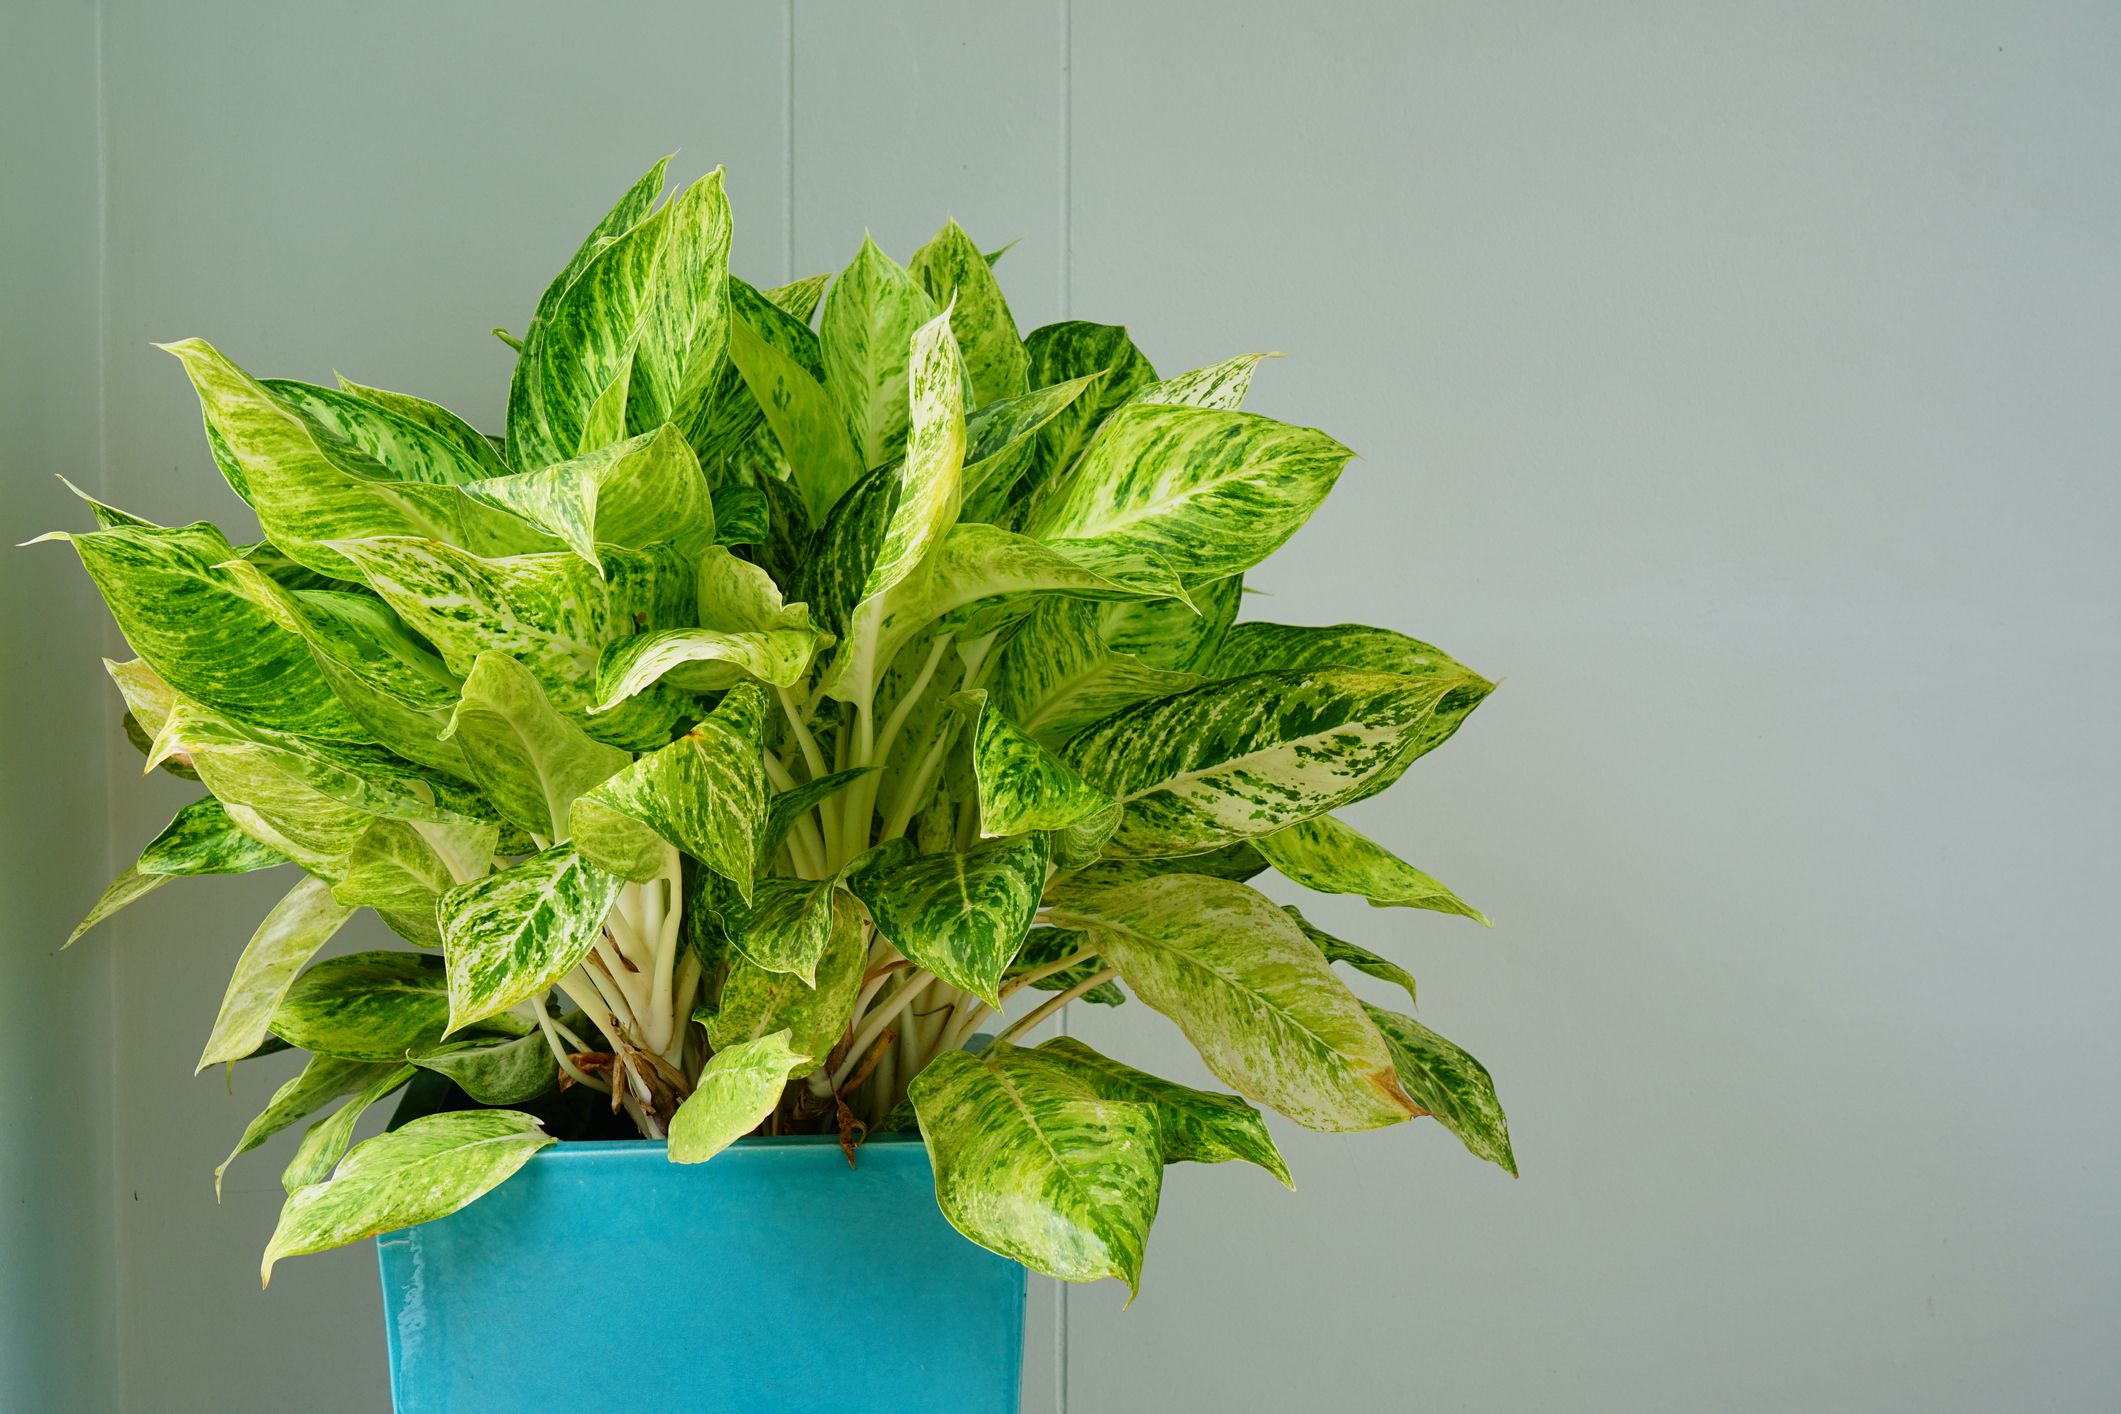 <p>A common houseplant, Dieffenbachia contains <a href="https://wagwalking.com/condition/oxalates-insoluble-poisoning">calcium oxalate crystals</a> that can cause gastrointestinal distress in pets when ingested. In very rare cases, biting or chewing into the plant can cause inflammation of the upper airway that requires immediate medical attention. </p>